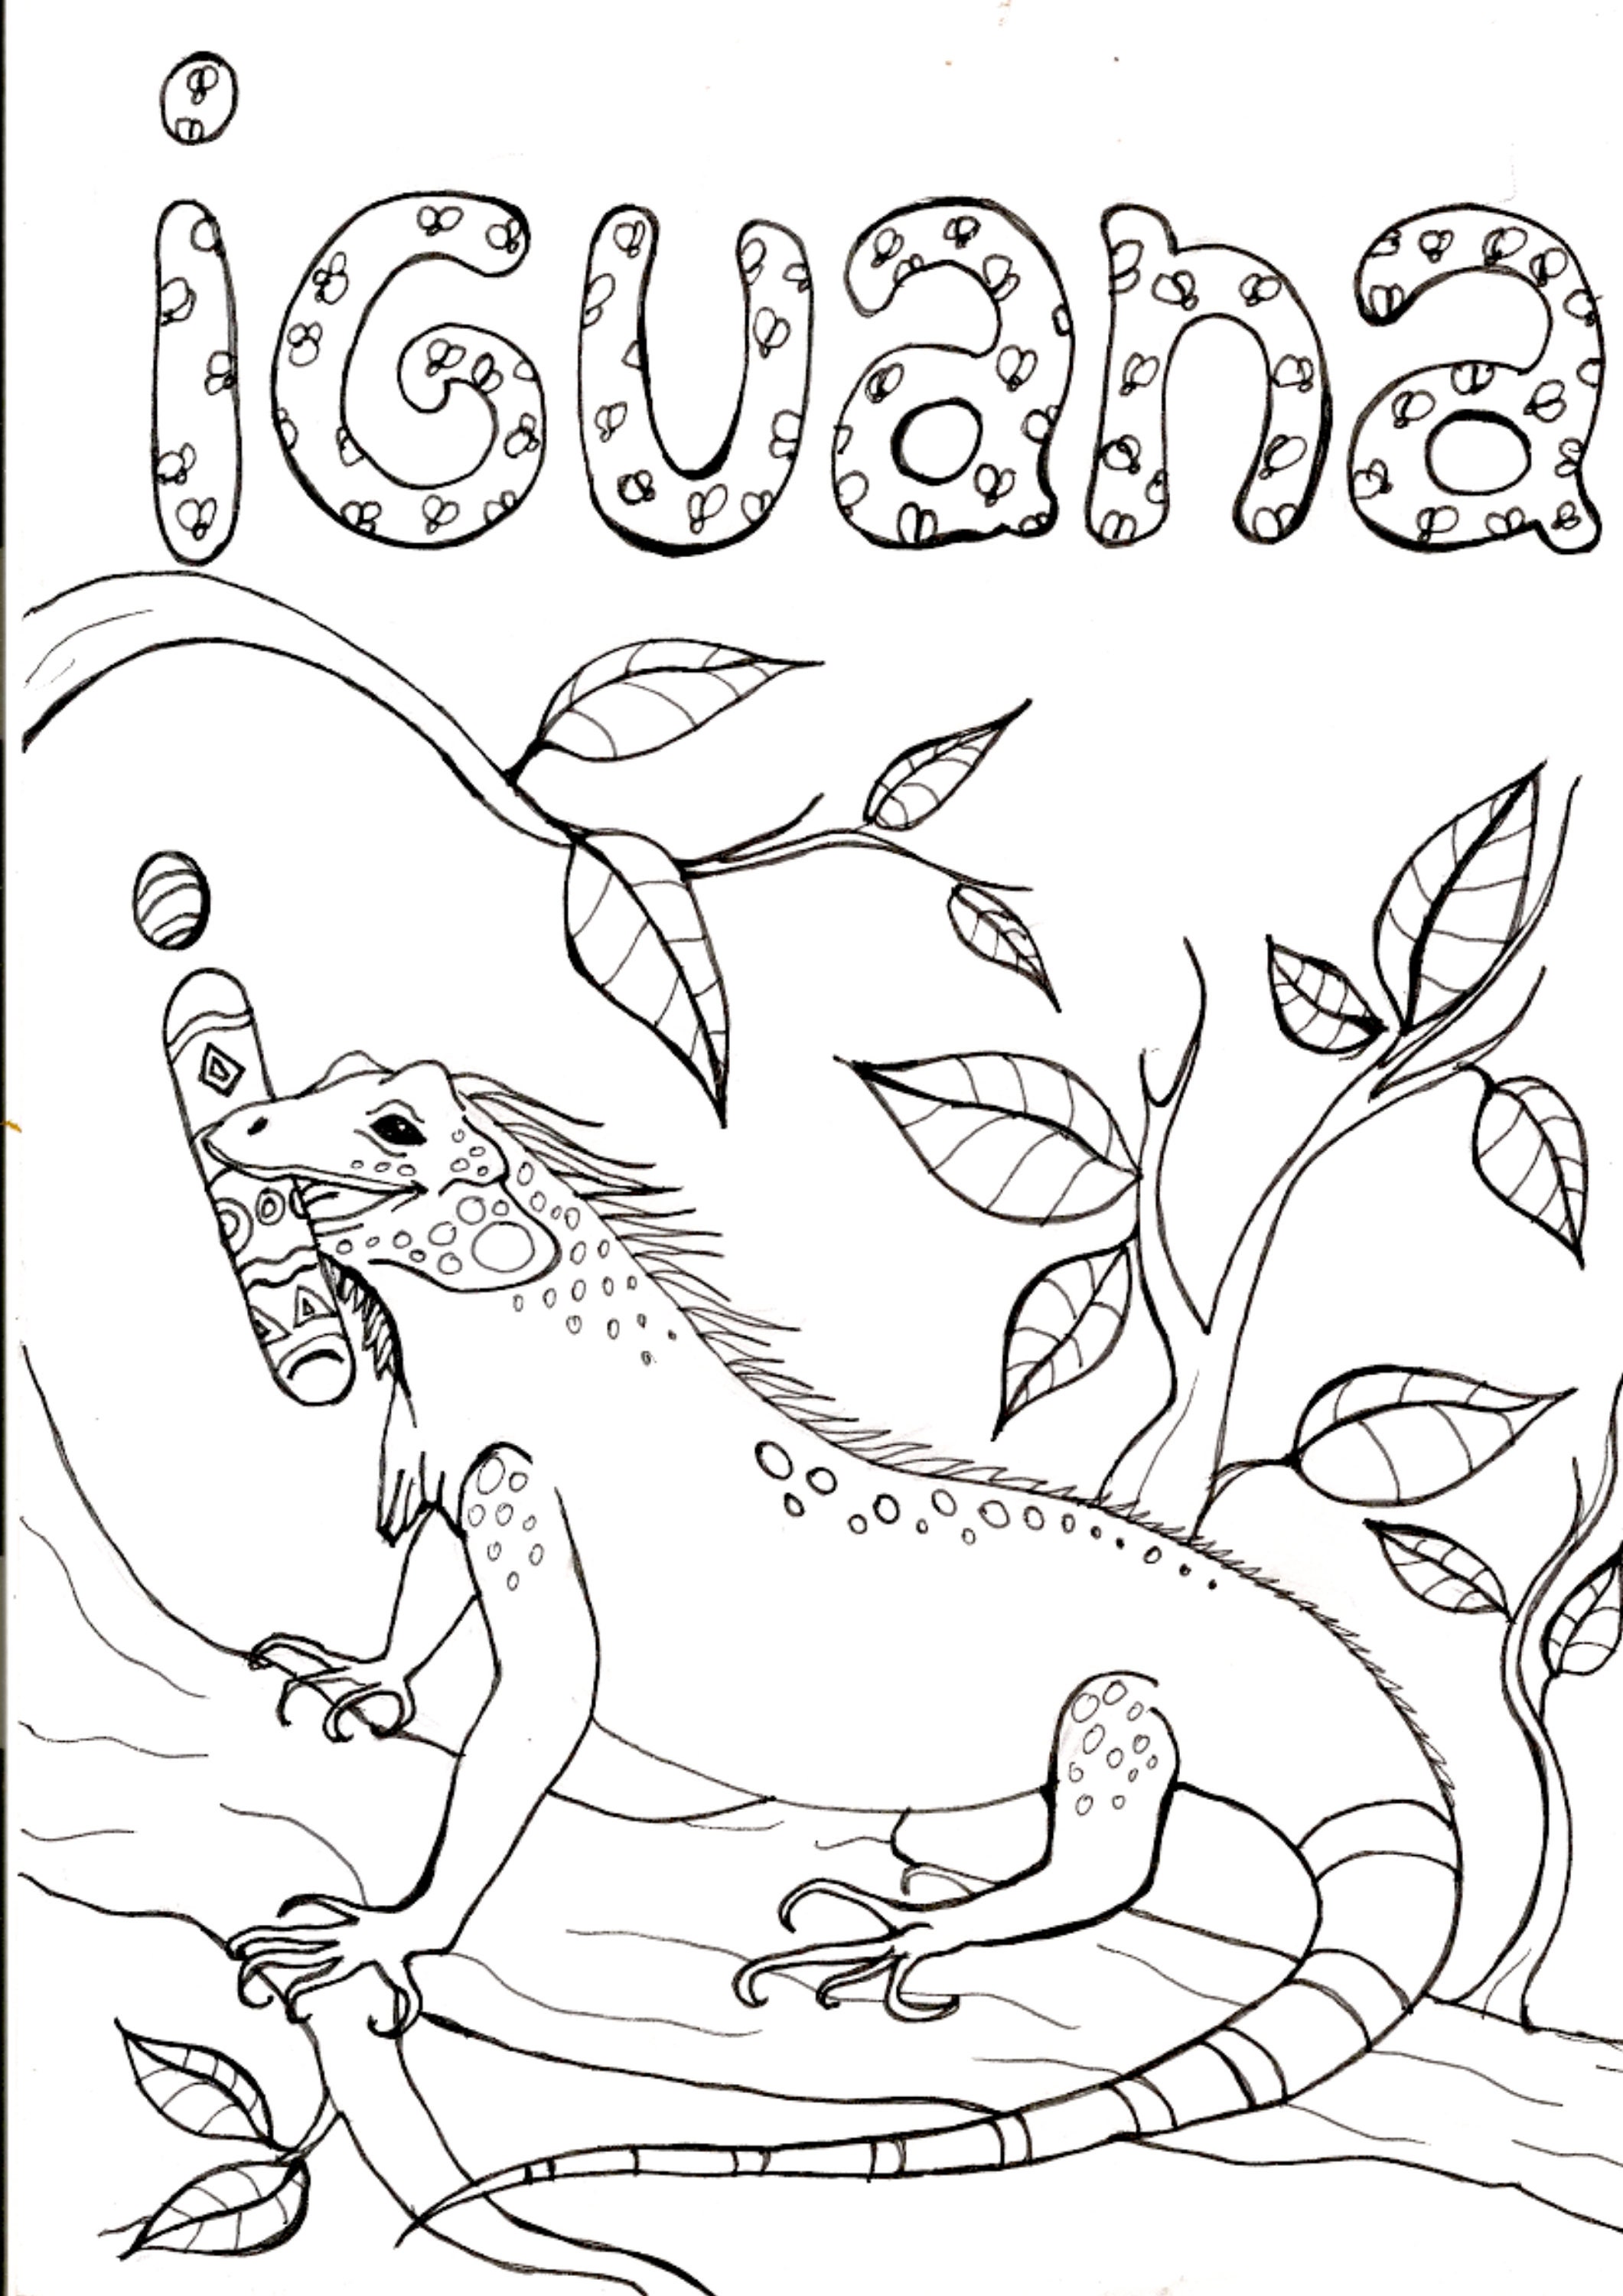 Letter I, Iguana Reusable Coloring Page, Felt Coloring Pages, Vinyl  Coloring Pages, Children's Coloring Pages, Birthday Gift